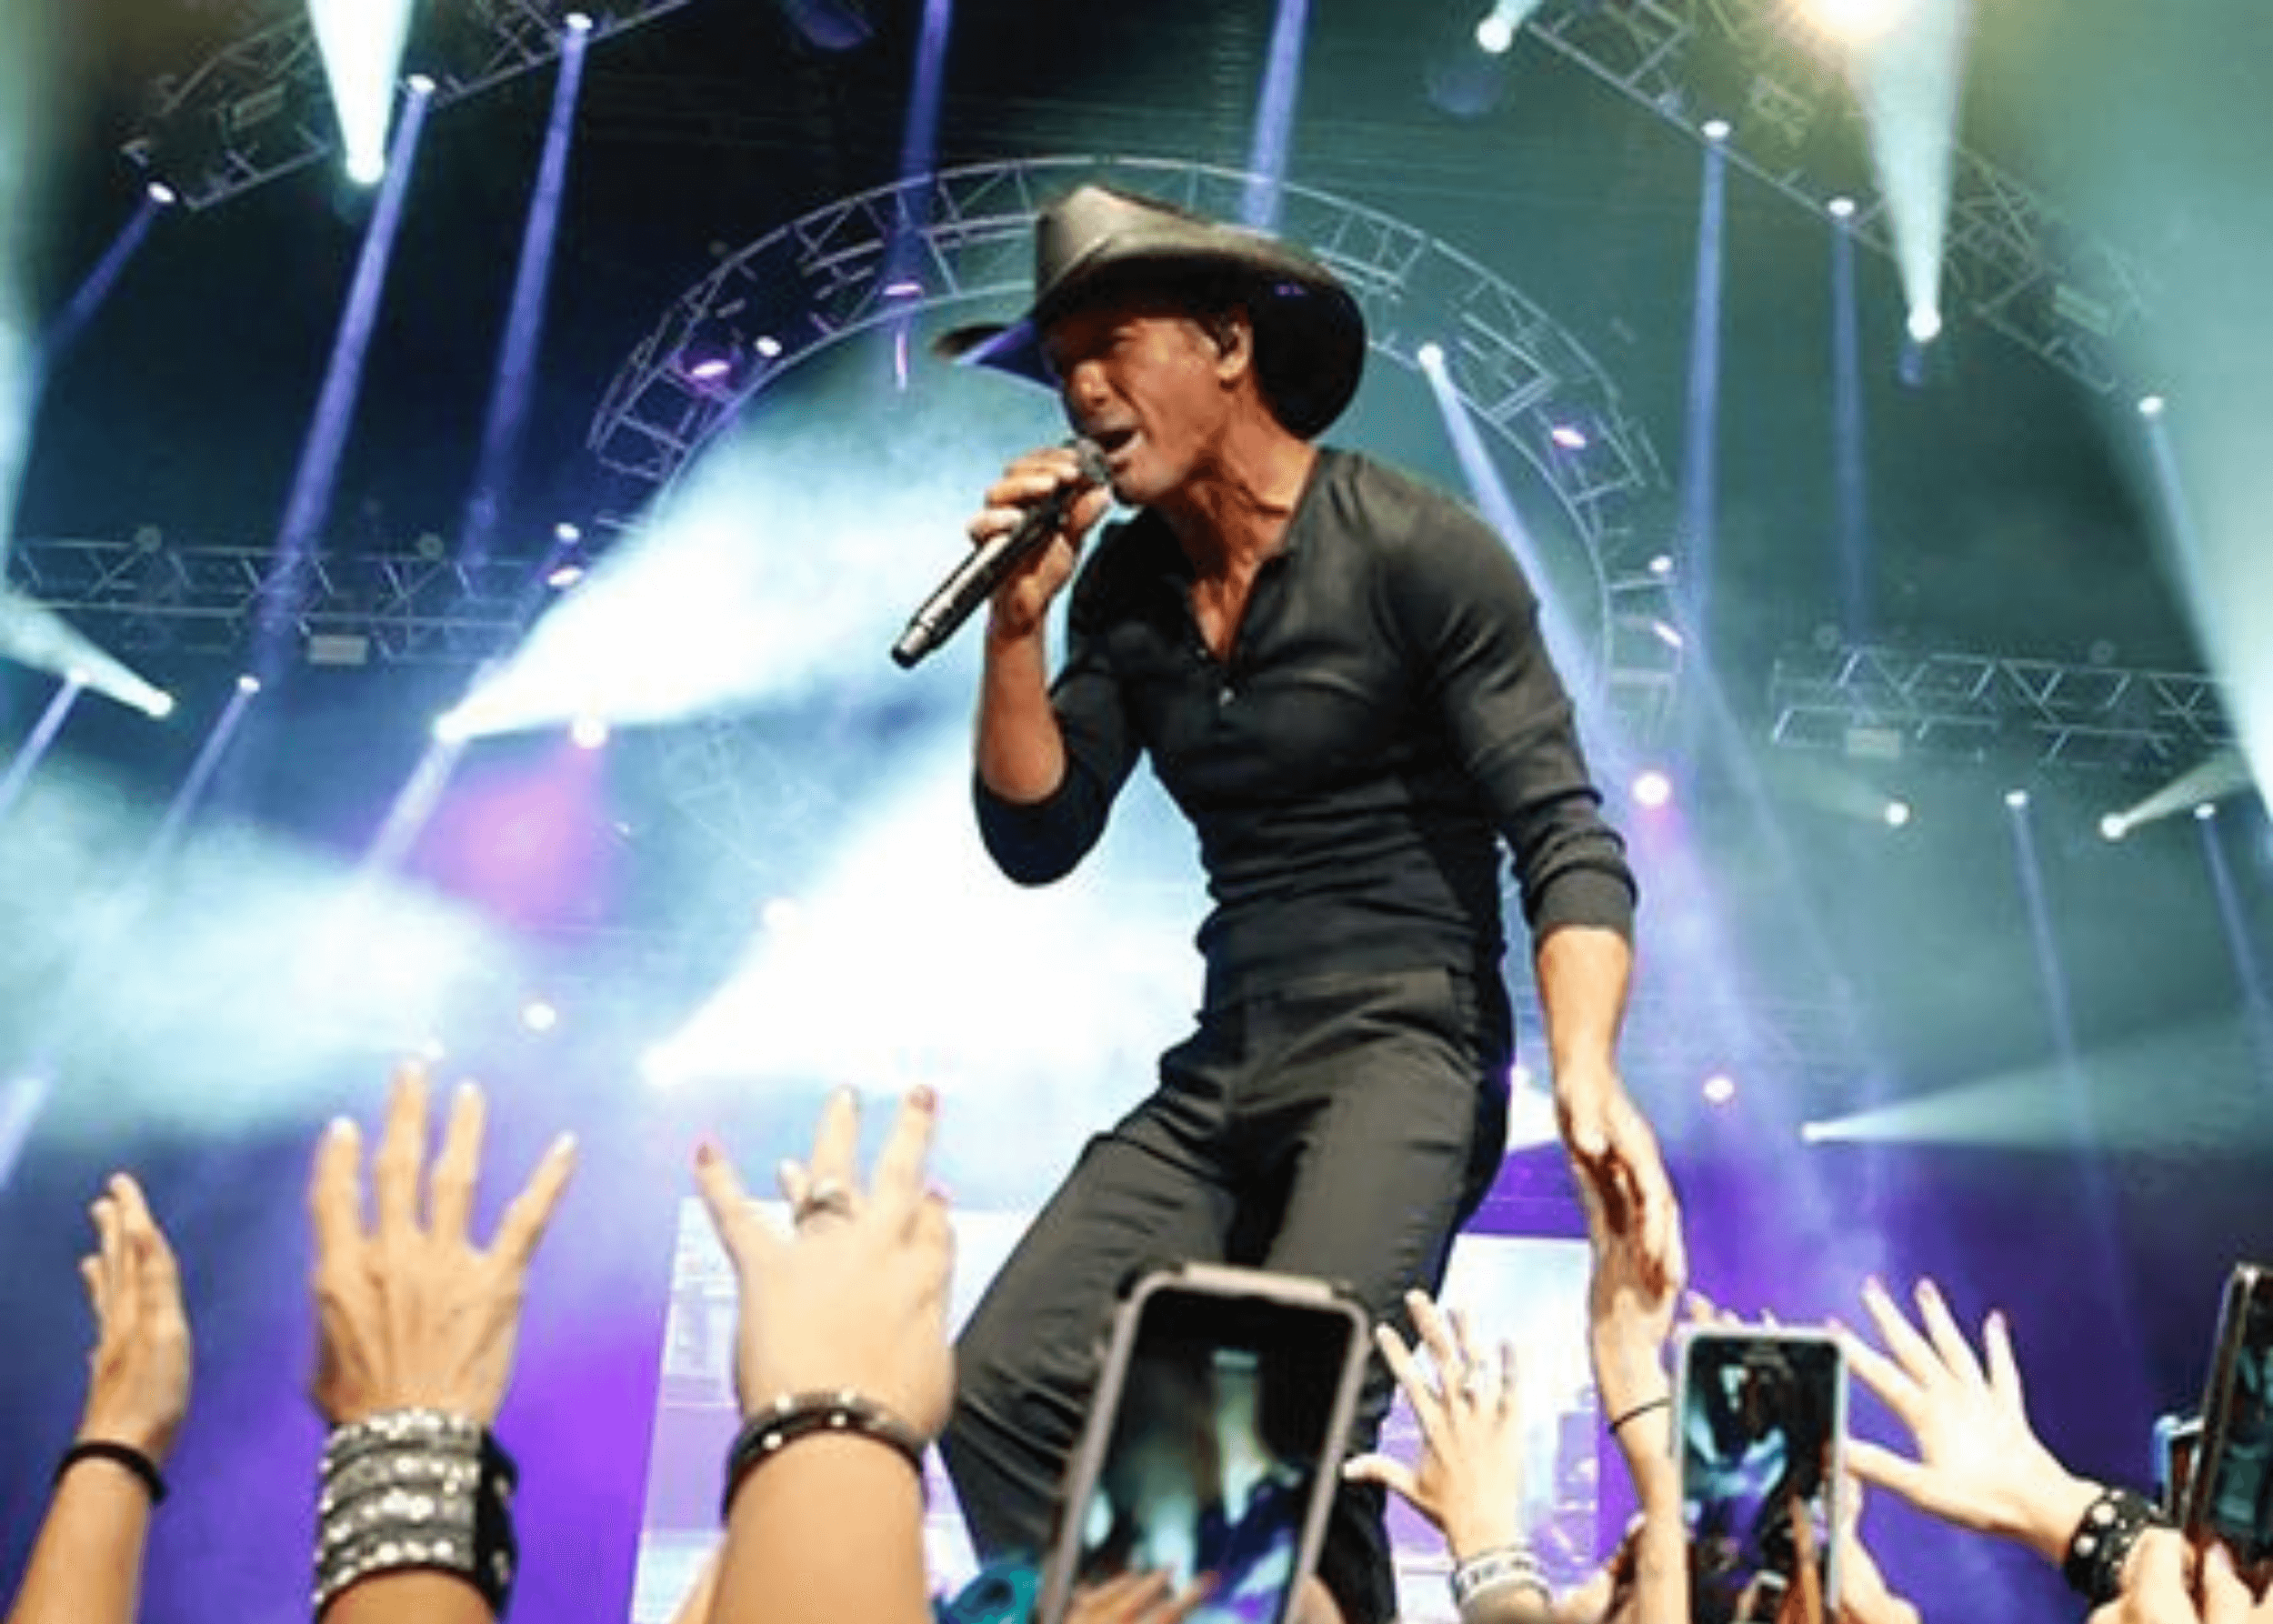 Large Scale Event Planning. Keynote Speaker. Corporate Events. Corporate Speakers. Motivational Speakers. Celebrity Speakers. Celebrity events. Large concerts. Casino Concerts. Tim McGraw